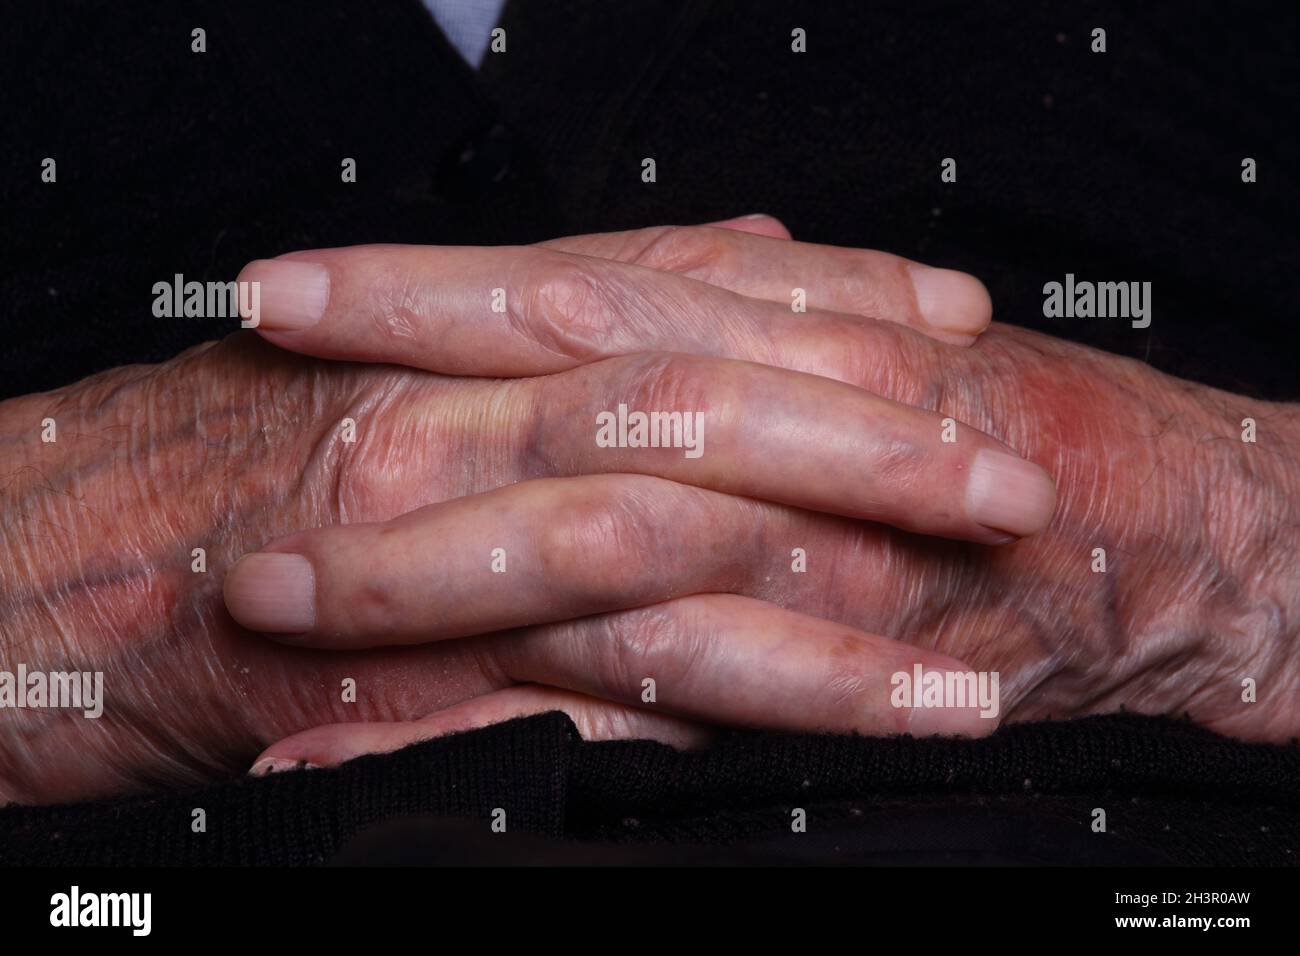 close-up on elderly person's hands | grandfather | white | third Age Stock Photo